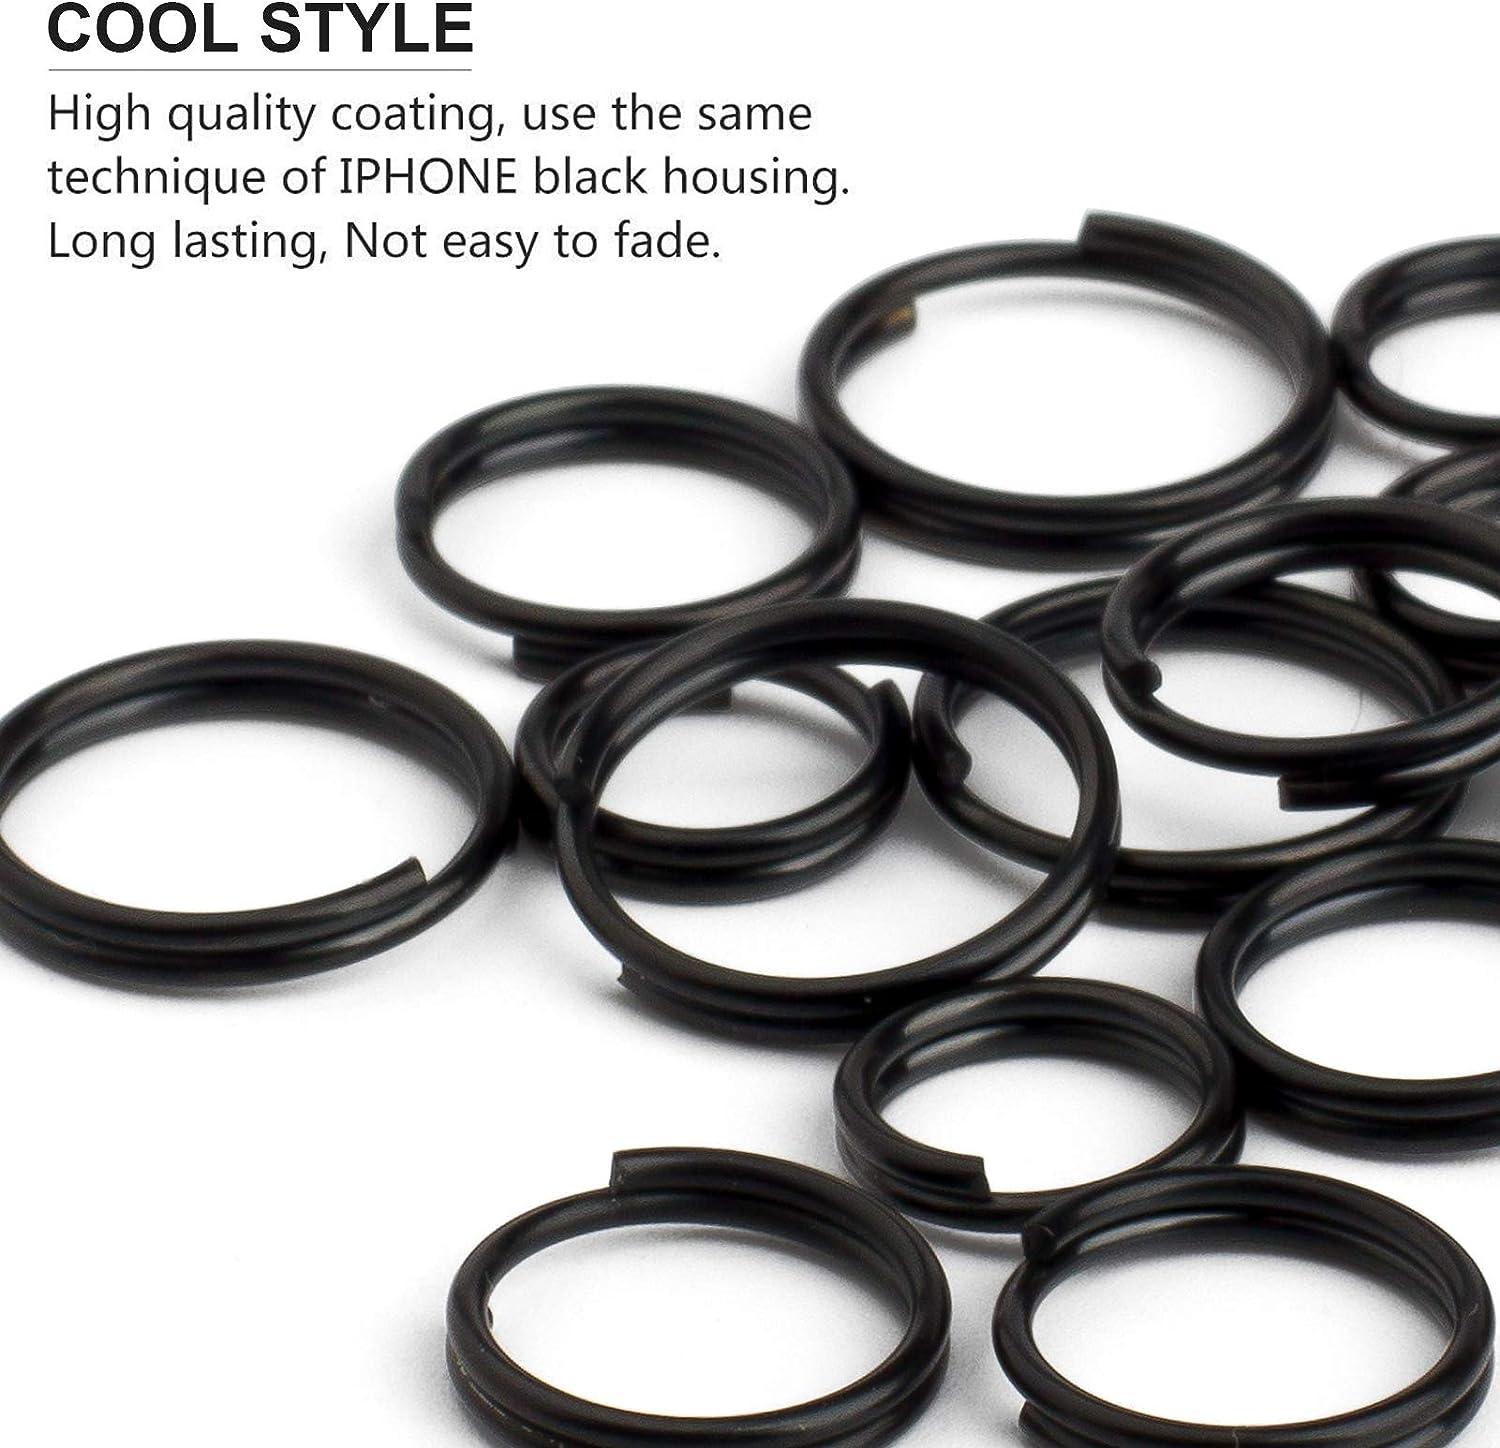  FEGVE Titanium Key Rings Split Rings 4 Packs, Key Rings for  Keychains, Keychain Ring for Home Car Keys Organization (Black - 32 mm /  1.25 inches) : Clothing, Shoes & Jewelry